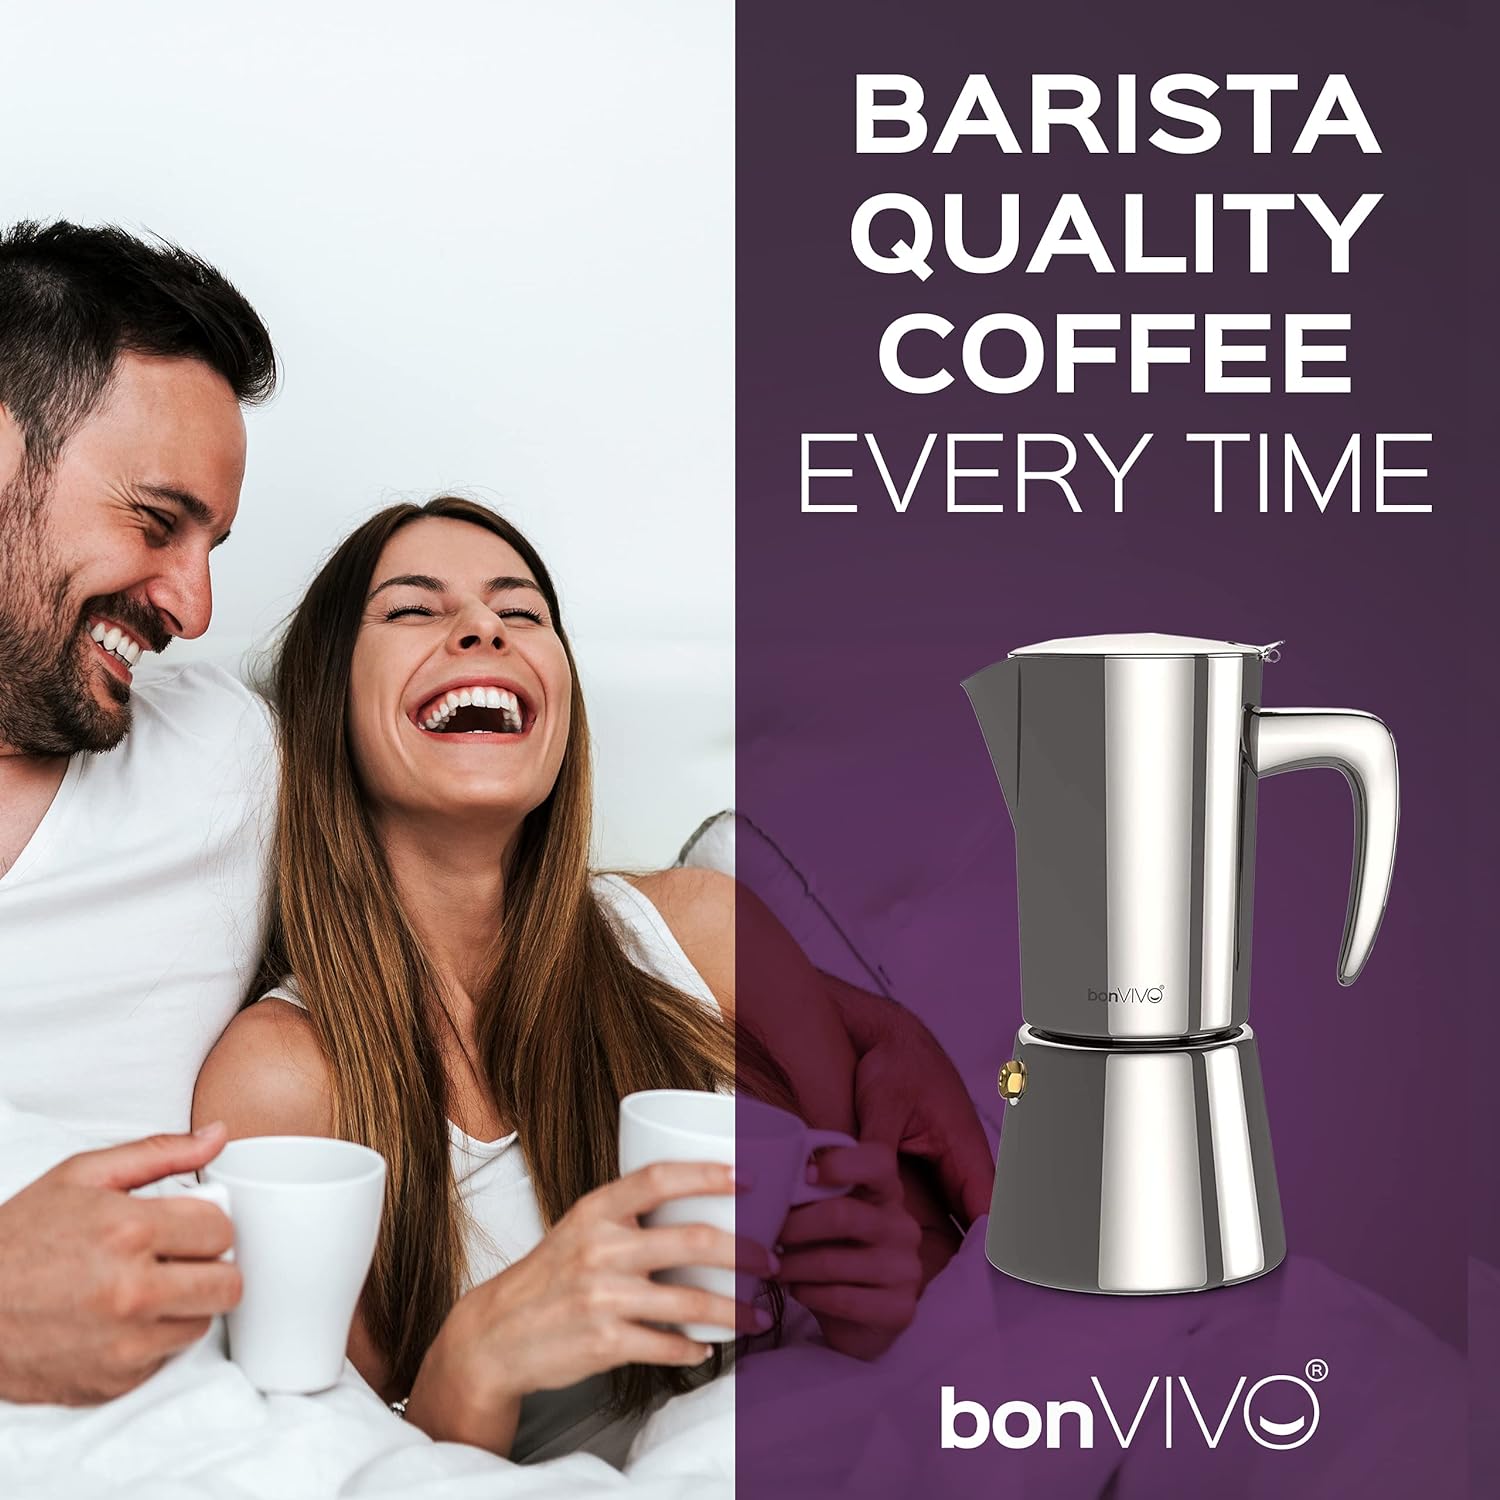 bonVIVO Intenca Stovetop Espresso Maker - Luxurious, Stainless Steel Italian Coffee Maker for Camping or Home Use - Makes 6 Cups of Full-Bodied Coffee - Copper, 10oz